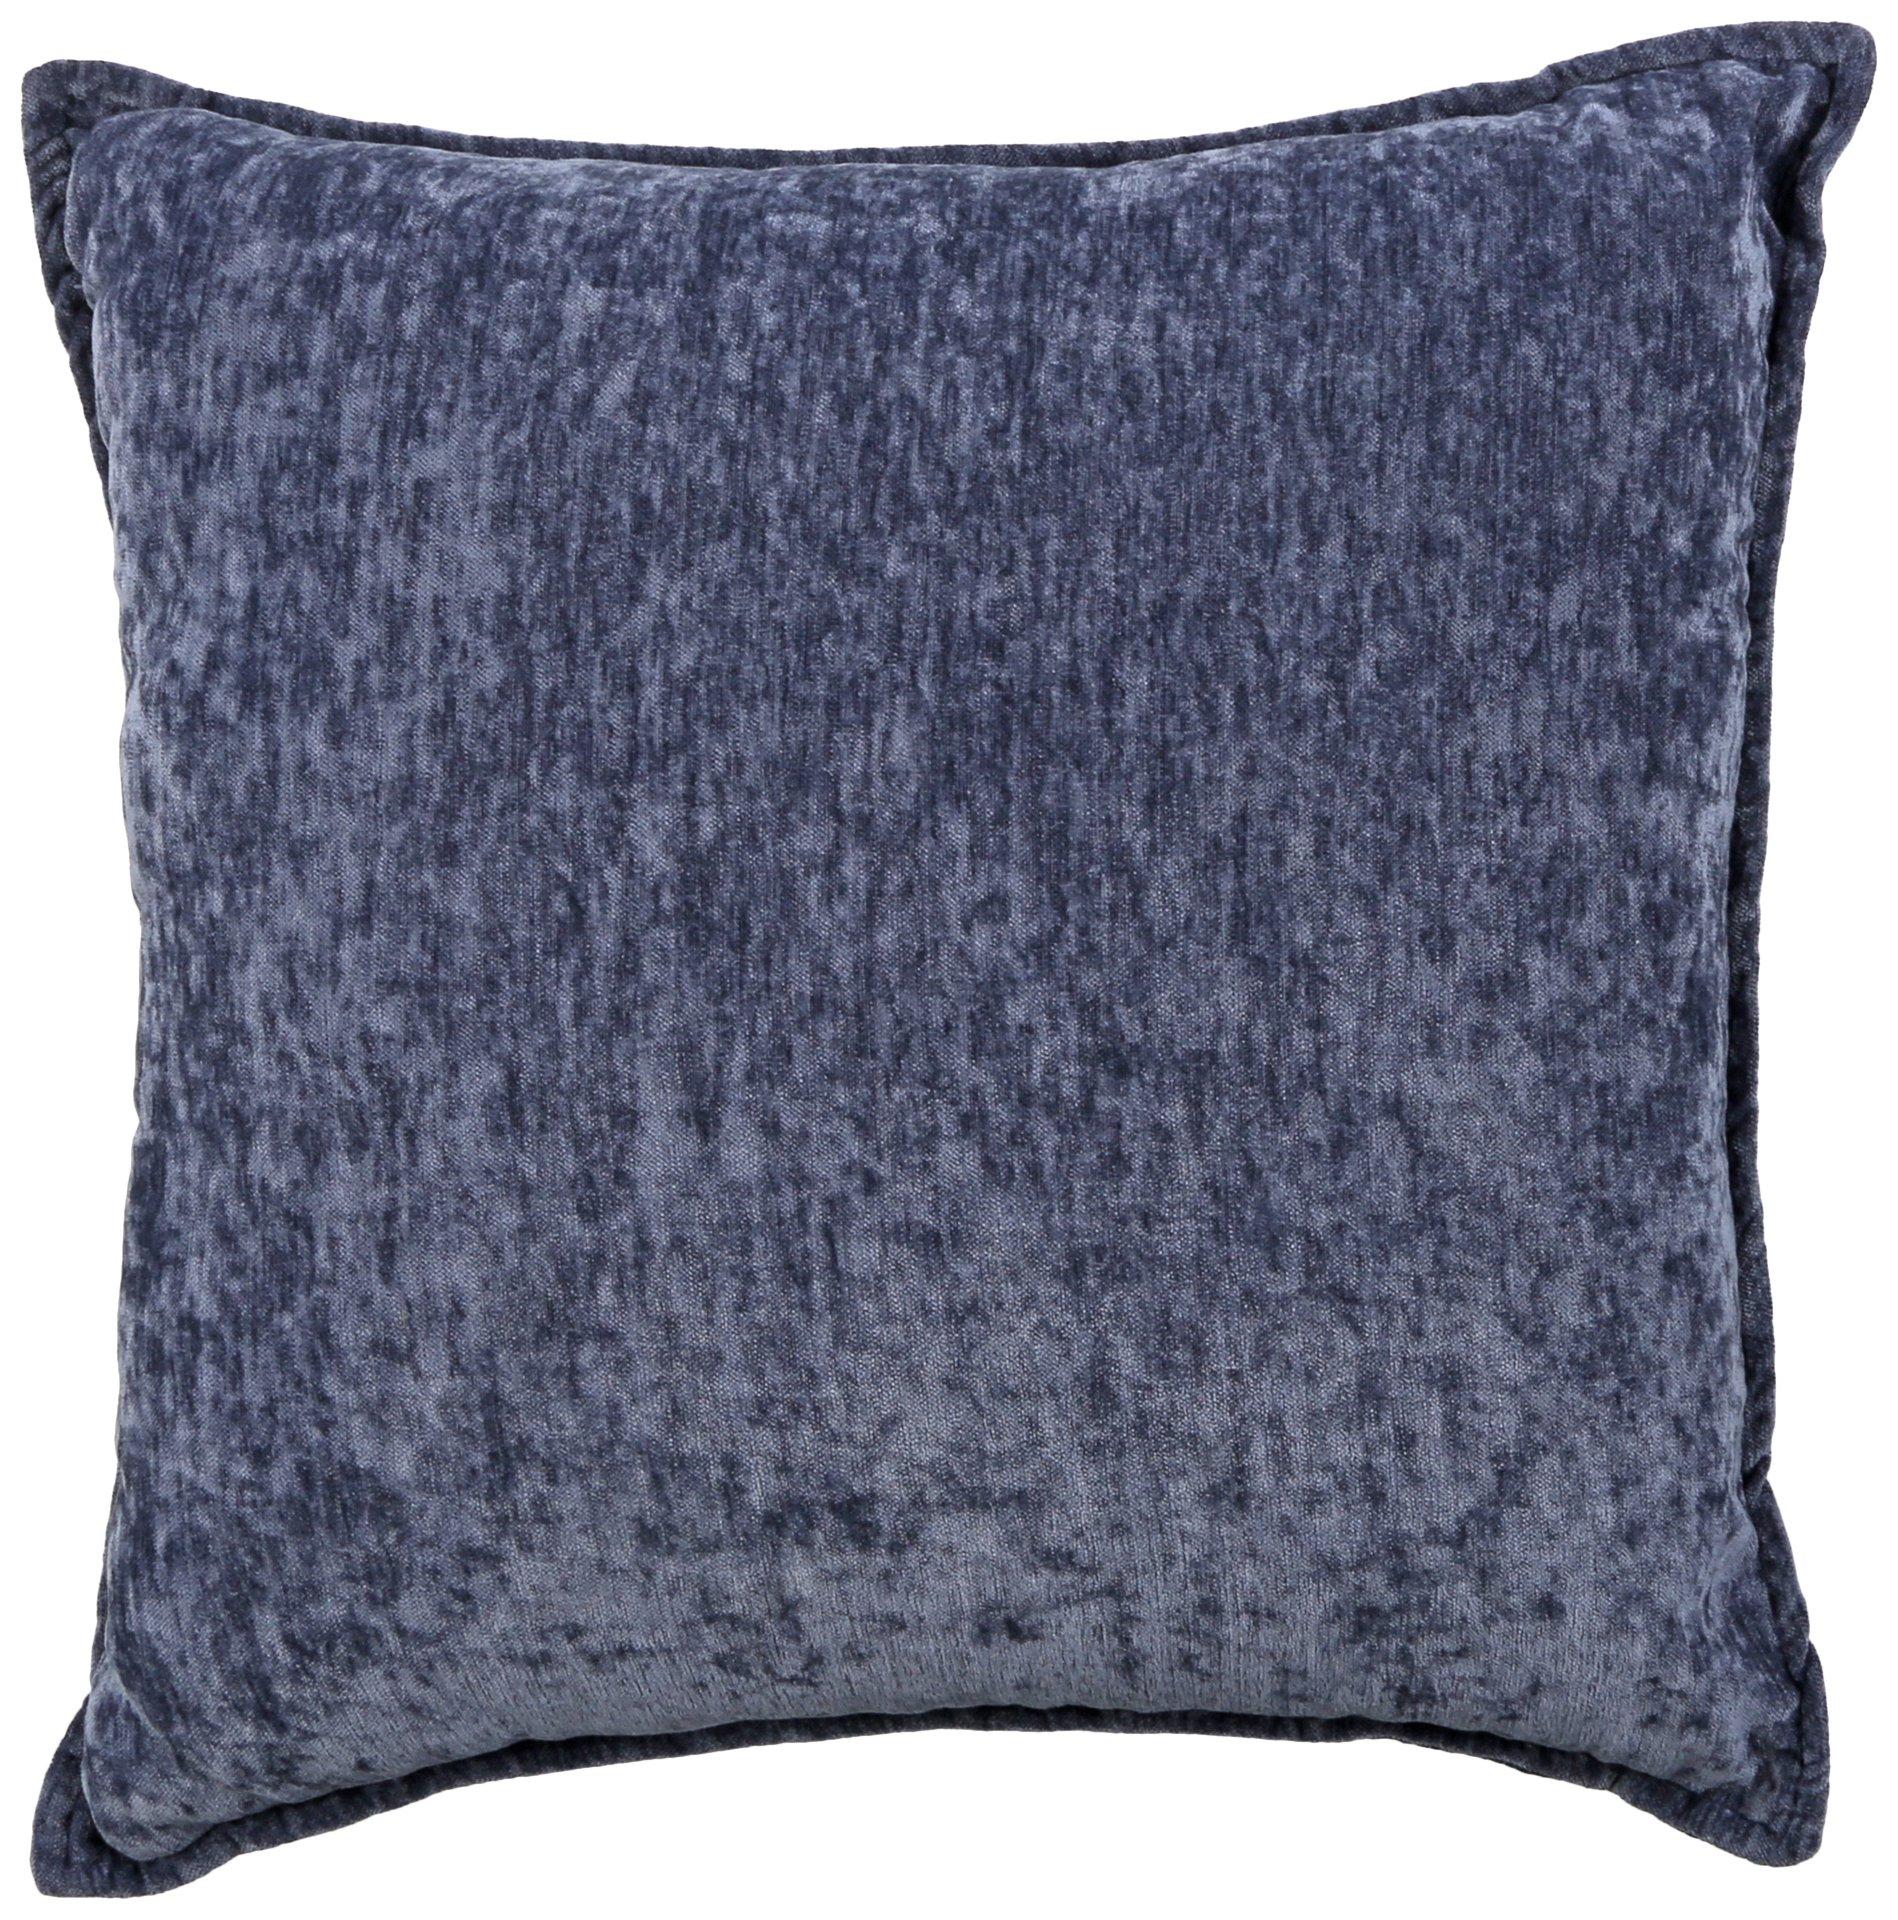 Mina Victory Life Styles Cotton Knitted 18x18 Indoor Throw Pillows Set of 2 Navy